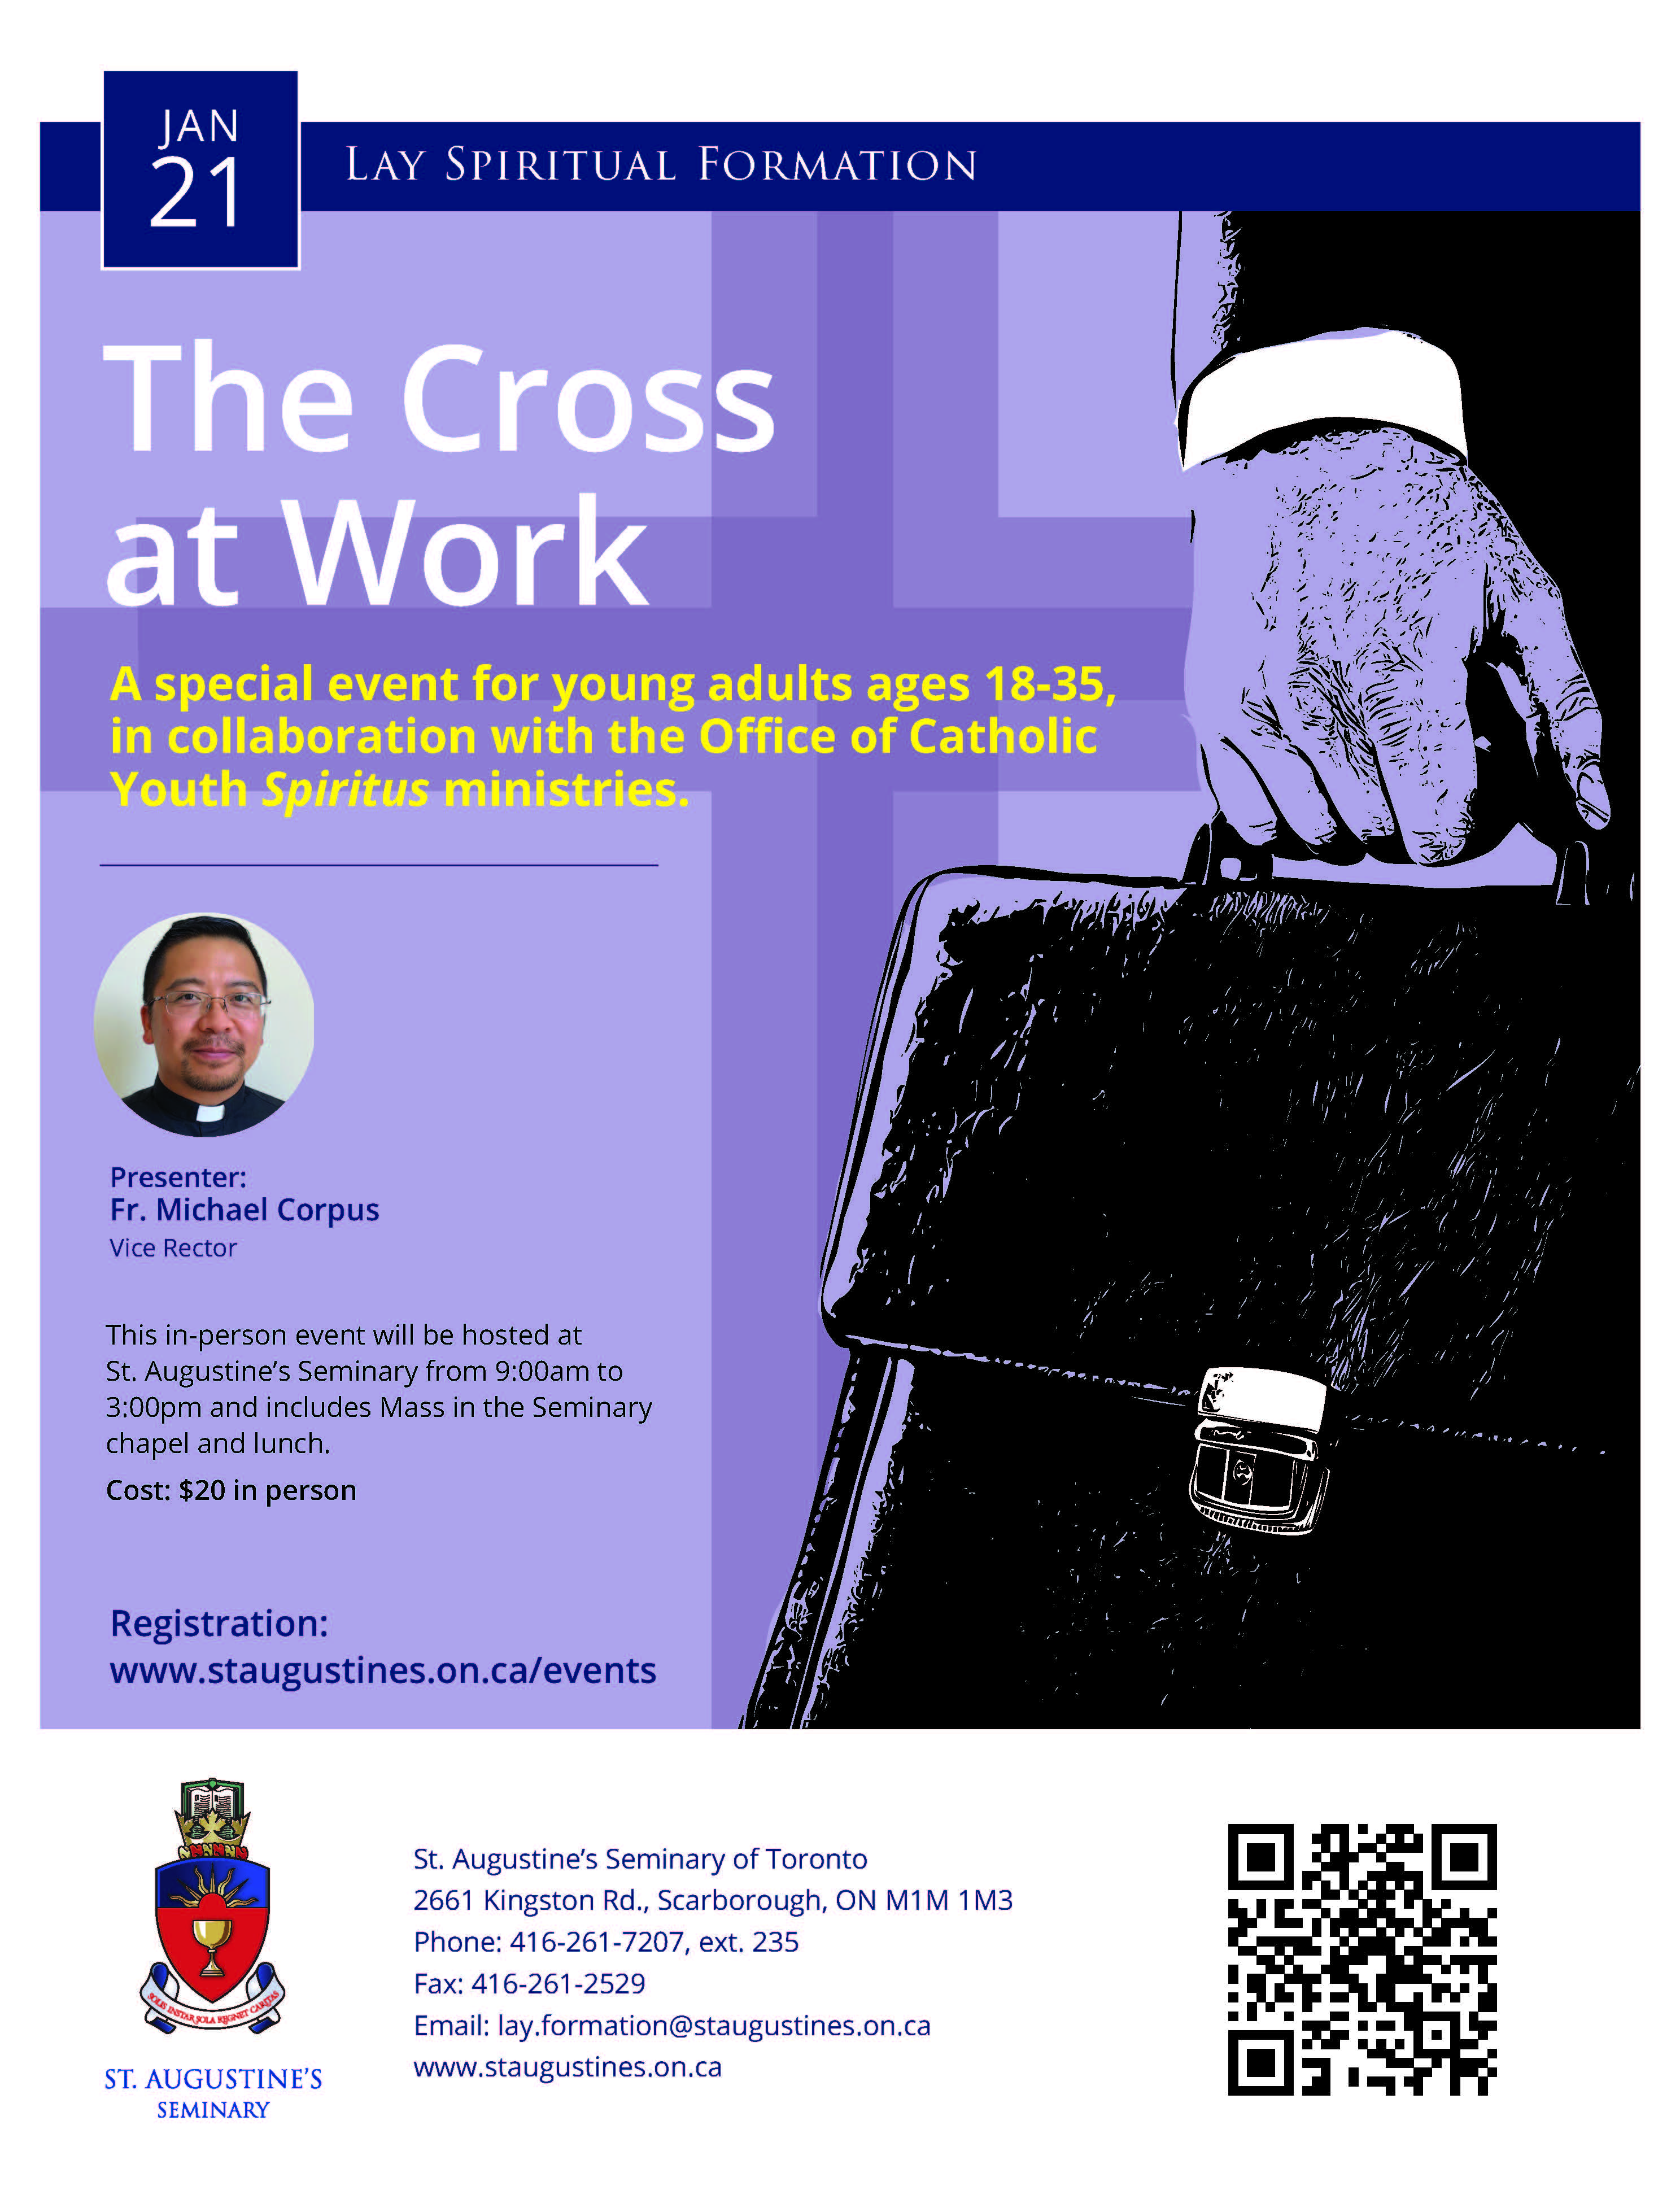 Lay Spiritual Formation Series - The Cross at Work (For young adults, ages 18-35)